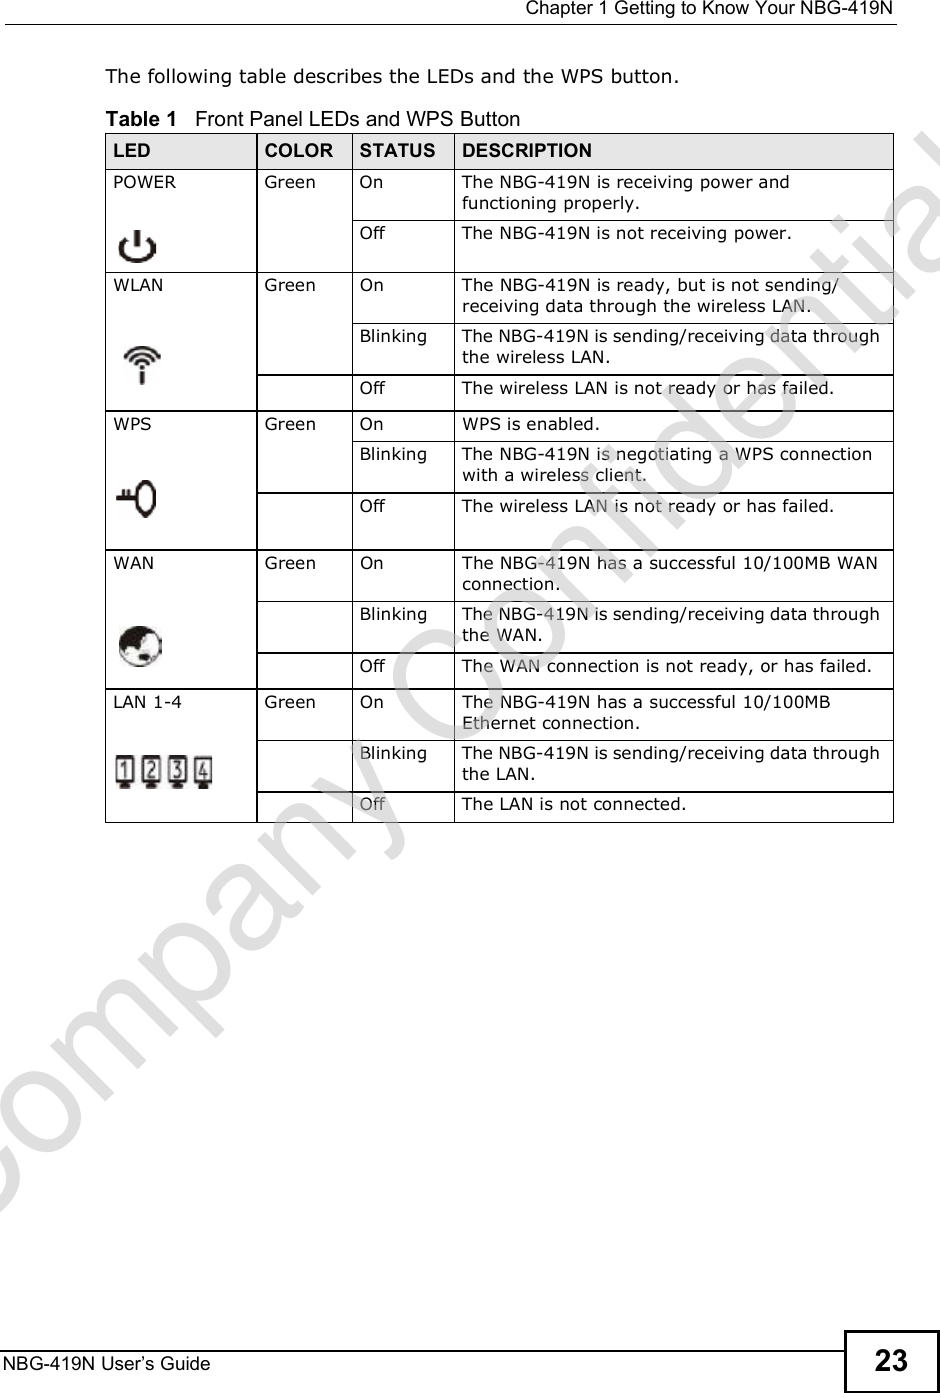  Chapter 1Getting to Know Your NBG-419NNBG-419N User s Guide 23The following table describes the LEDs and the WPS button.Table 1   Front Panel LEDs and WPS ButtonLED COLOR STATUS DESCRIPTIONPOWERGreenOnThe NBG-419N is receiving power and functioning properly. OffThe NBG-419N is not receiving power.WLANGreenOnThe NBG-419N is ready, but is not sending/receiving data through the wireless LAN. BlinkingThe NBG-419N is sending/receiving data through the wireless LAN.OffThe wireless LAN is not ready or has failed.WPSGreenOnWPS is enabled. BlinkingThe NBG-419N is negotiating a WPS connection with a wireless client.OffThe wireless LAN is not ready or has failed.WANGreenOnThe NBG-419N has a successful 10/100MB WAN connection.BlinkingThe NBG-419N is sending/receiving data through the WAN.OffThe WAN connection is not ready, or has failed.LAN 1-4GreenOnThe NBG-419N has a successful 10/100MB Ethernet connection. BlinkingThe NBG-419N is sending/receiving data through the LAN.OffThe LAN is not connected.Company Confidential